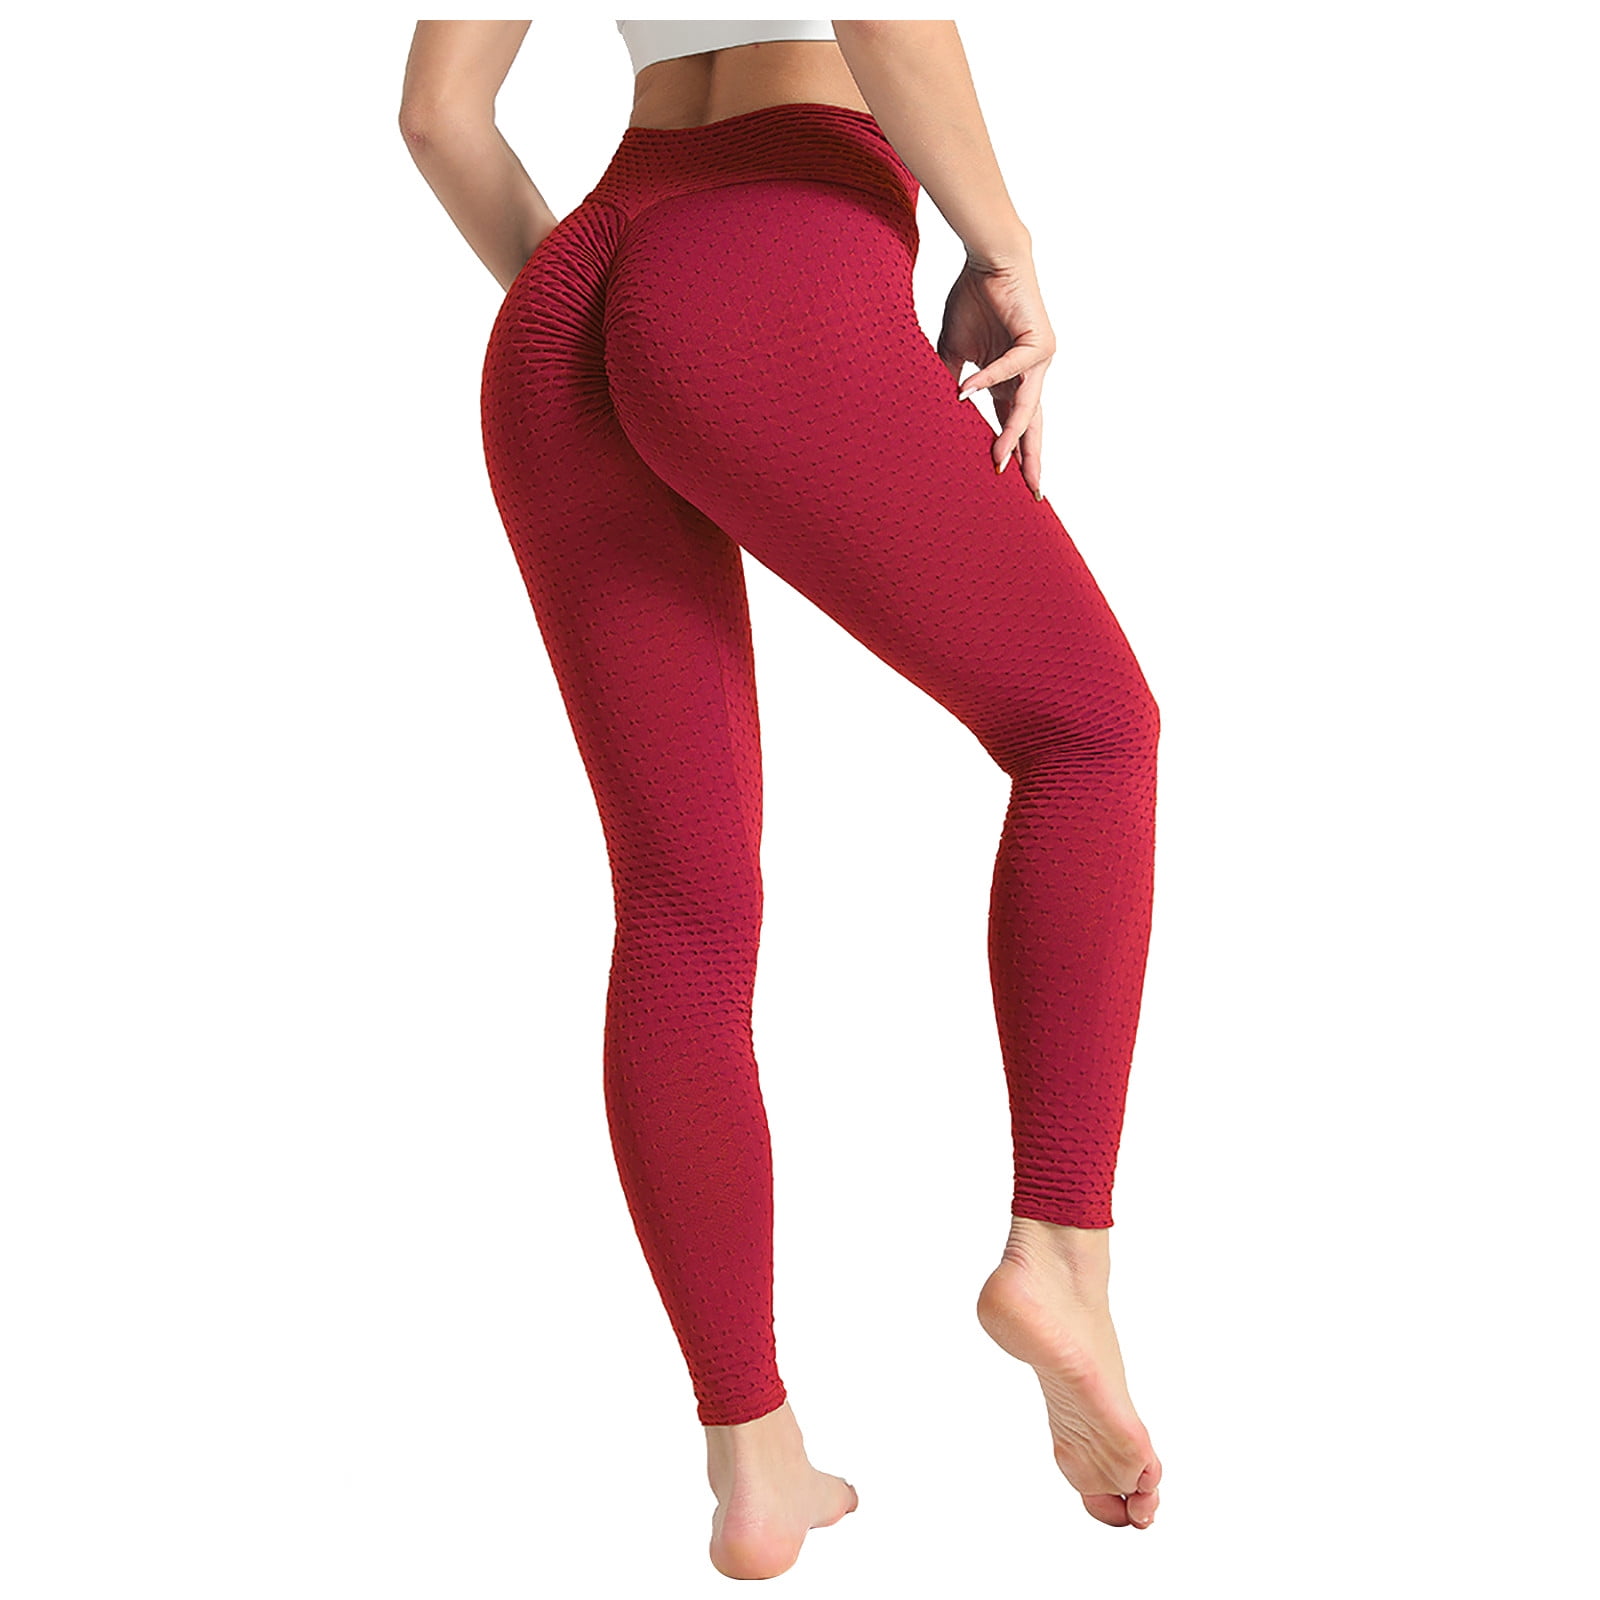 Women's High-Waisted Body-Shaping Fitness Cardio Leggings - Red